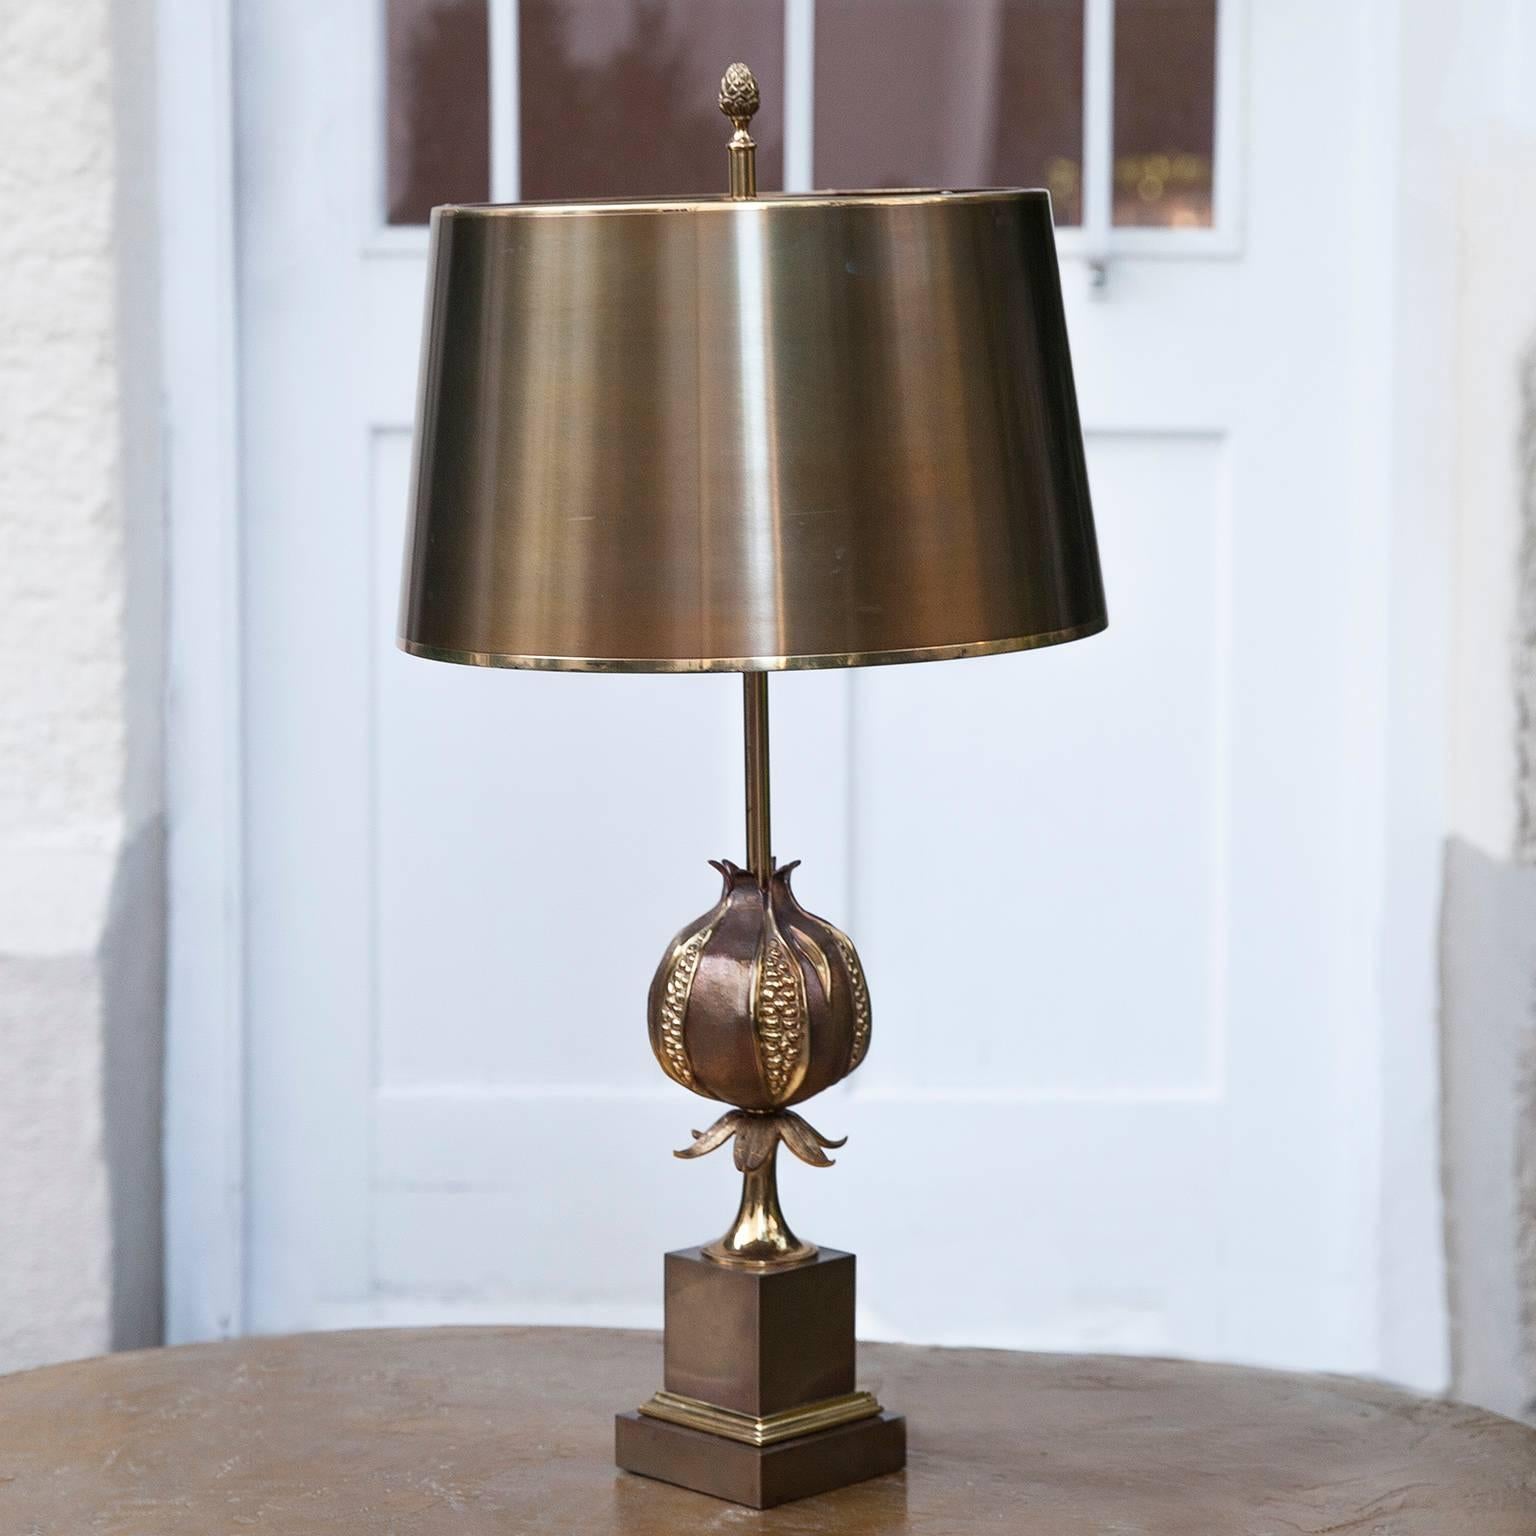 Fantastic bronze table lamp model 'Pomegranate' by Maison Charles. Bronze patinated brass shade and base, signed on the base, France, 1970s.

Measures: H 71, D 36 cm.